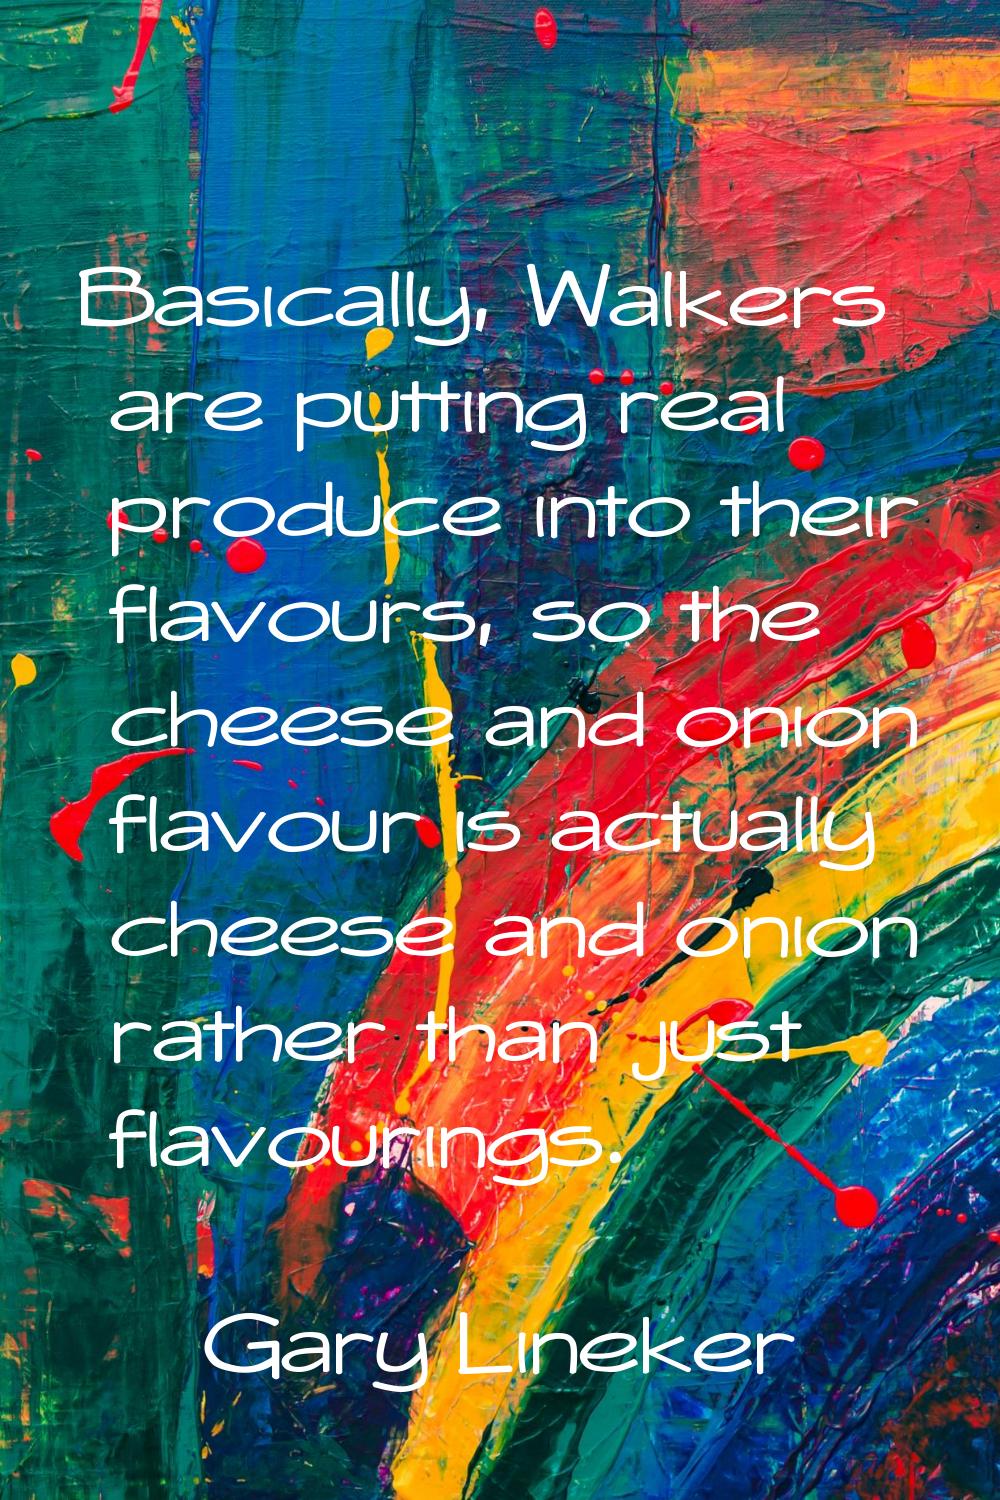 Basically, Walkers are putting real produce into their flavours, so the cheese and onion flavour is